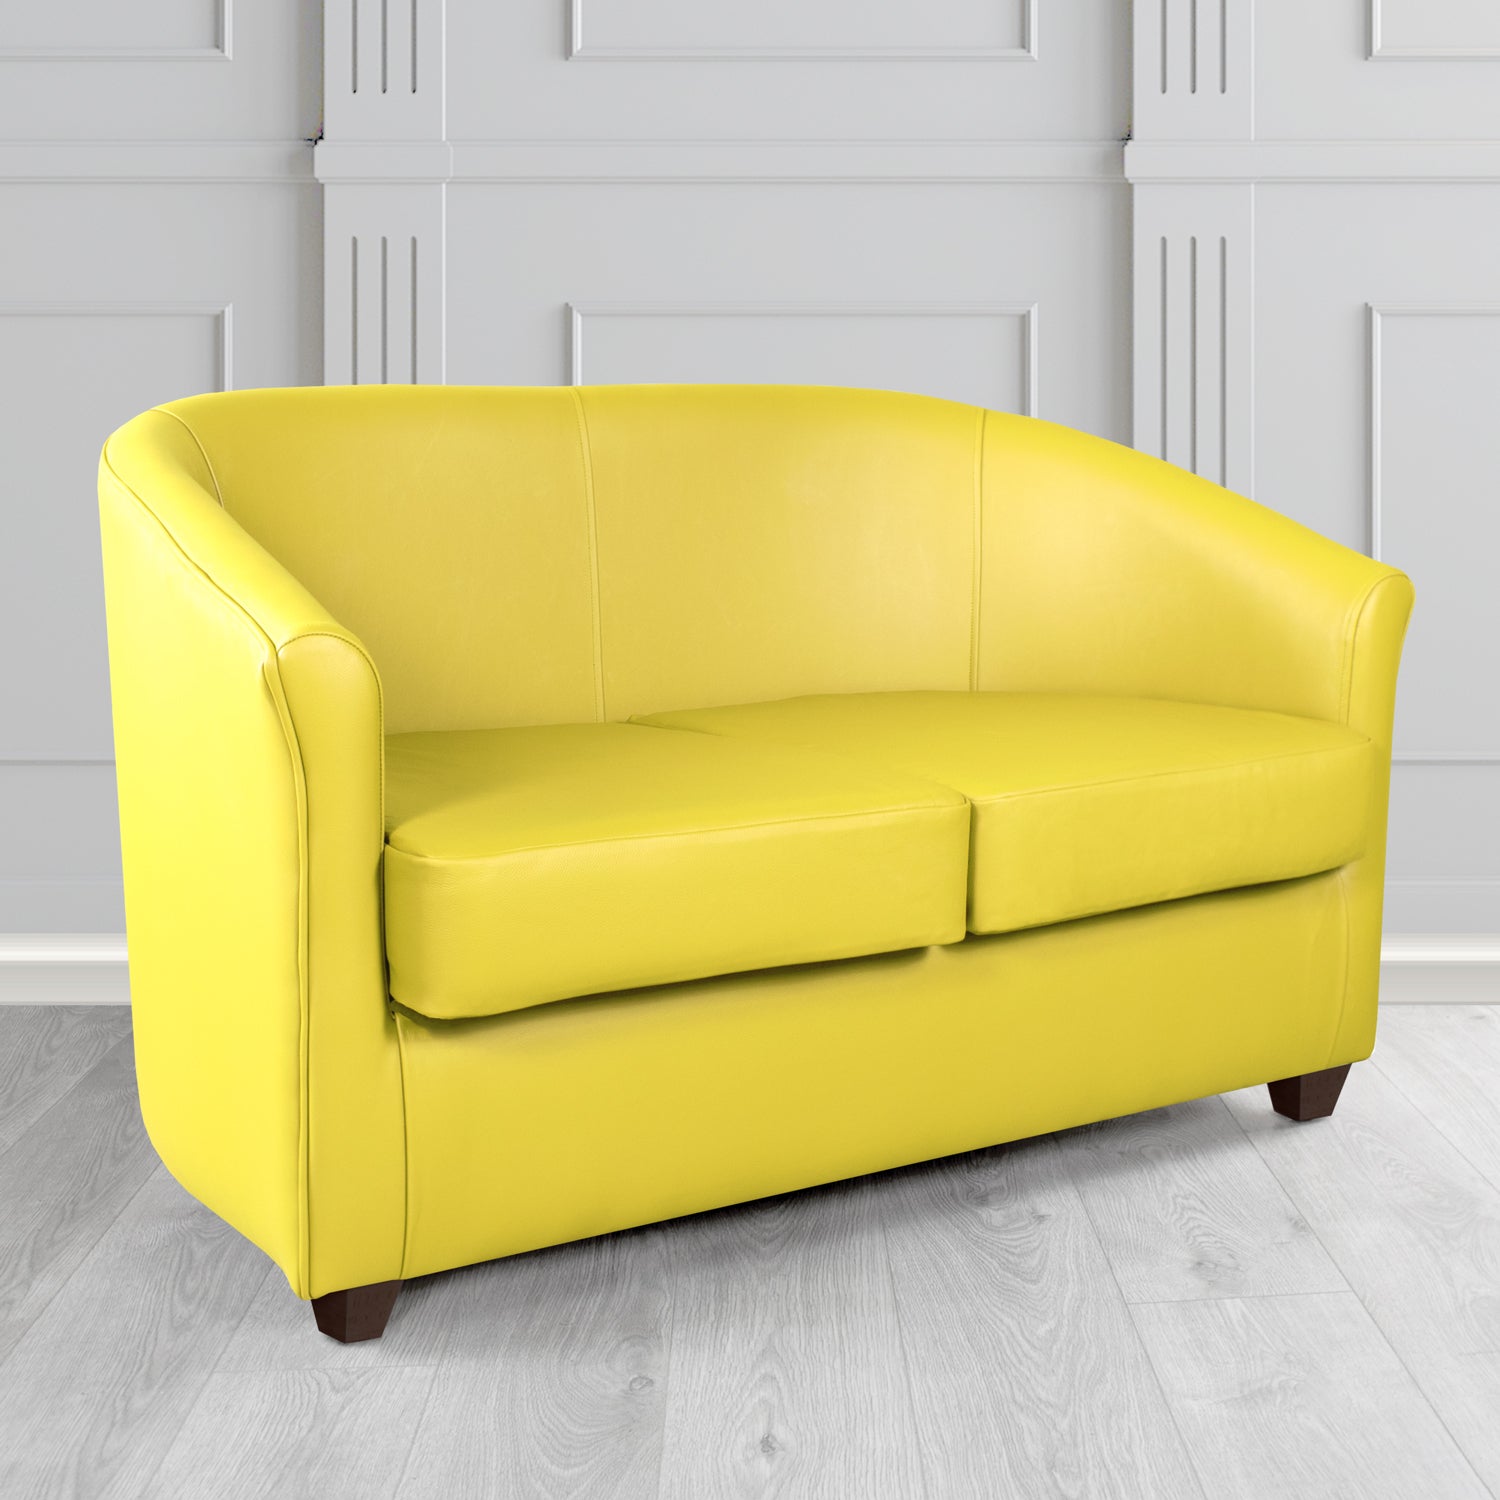 Cannes 2 Seater Tub Sofa in Just Colour Lemon Crib 5 Faux Leather - The Tub Chair Shop